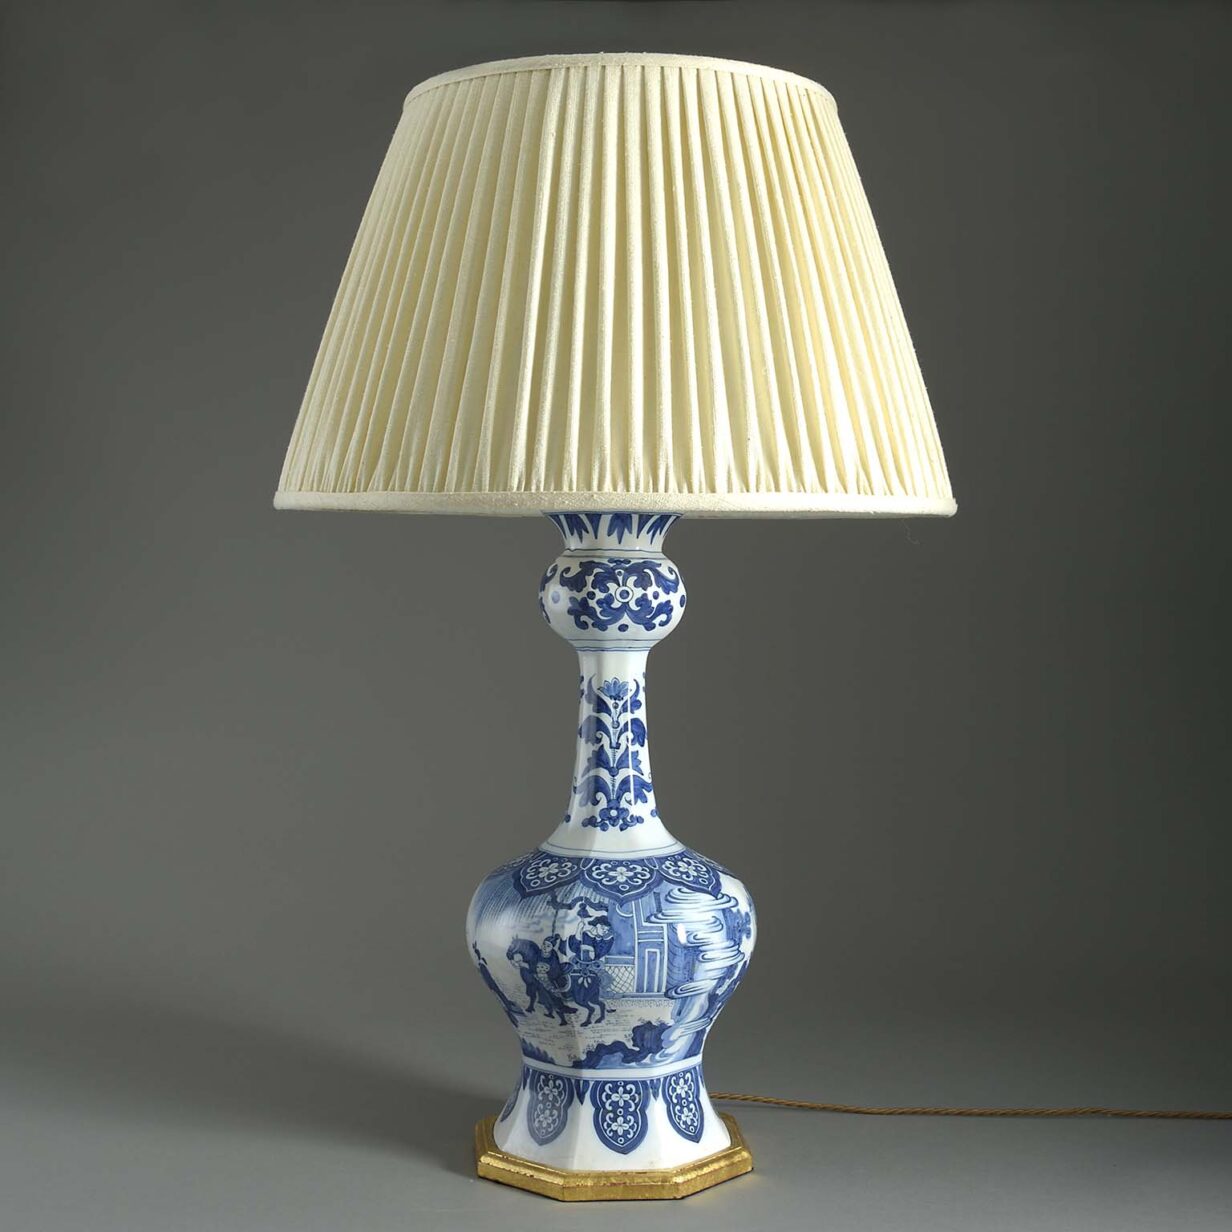 Large delft table lamp